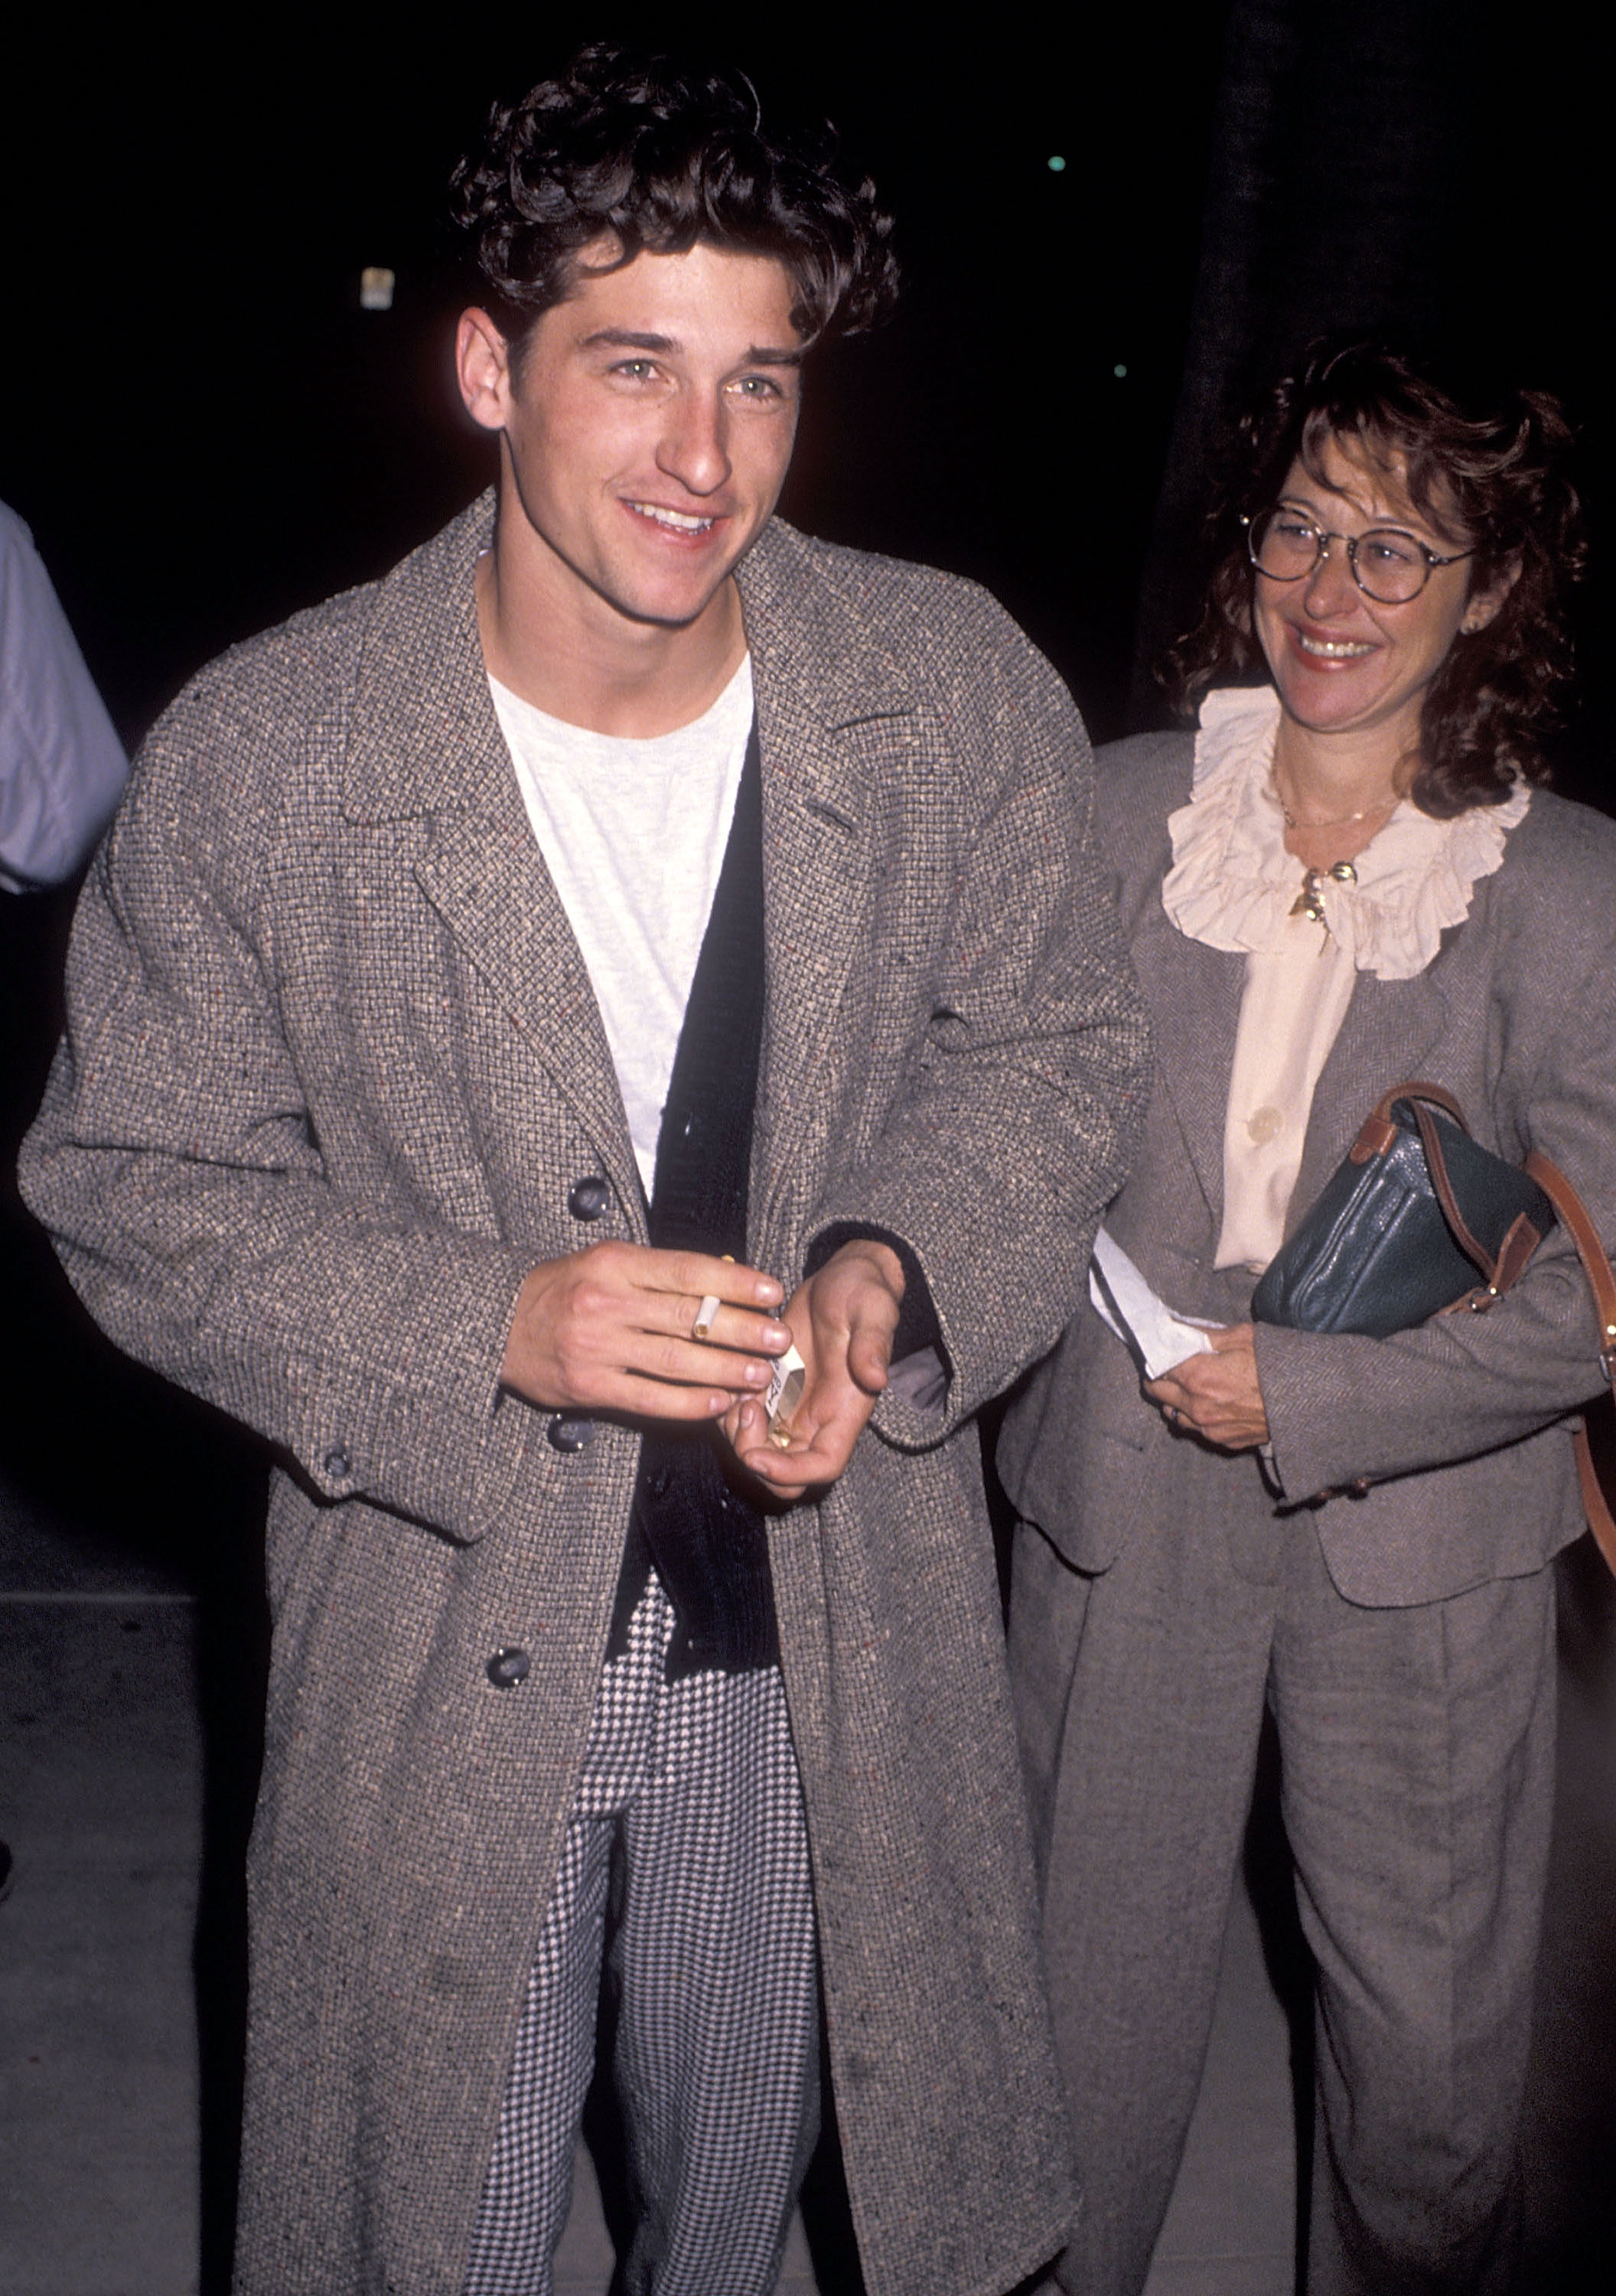 Rocky Parker and Patrick Dempsey attends the premiere of "Enemies, a Love Story" on December 12, 1989 in Beverly Hills, California | Source: Getty Images